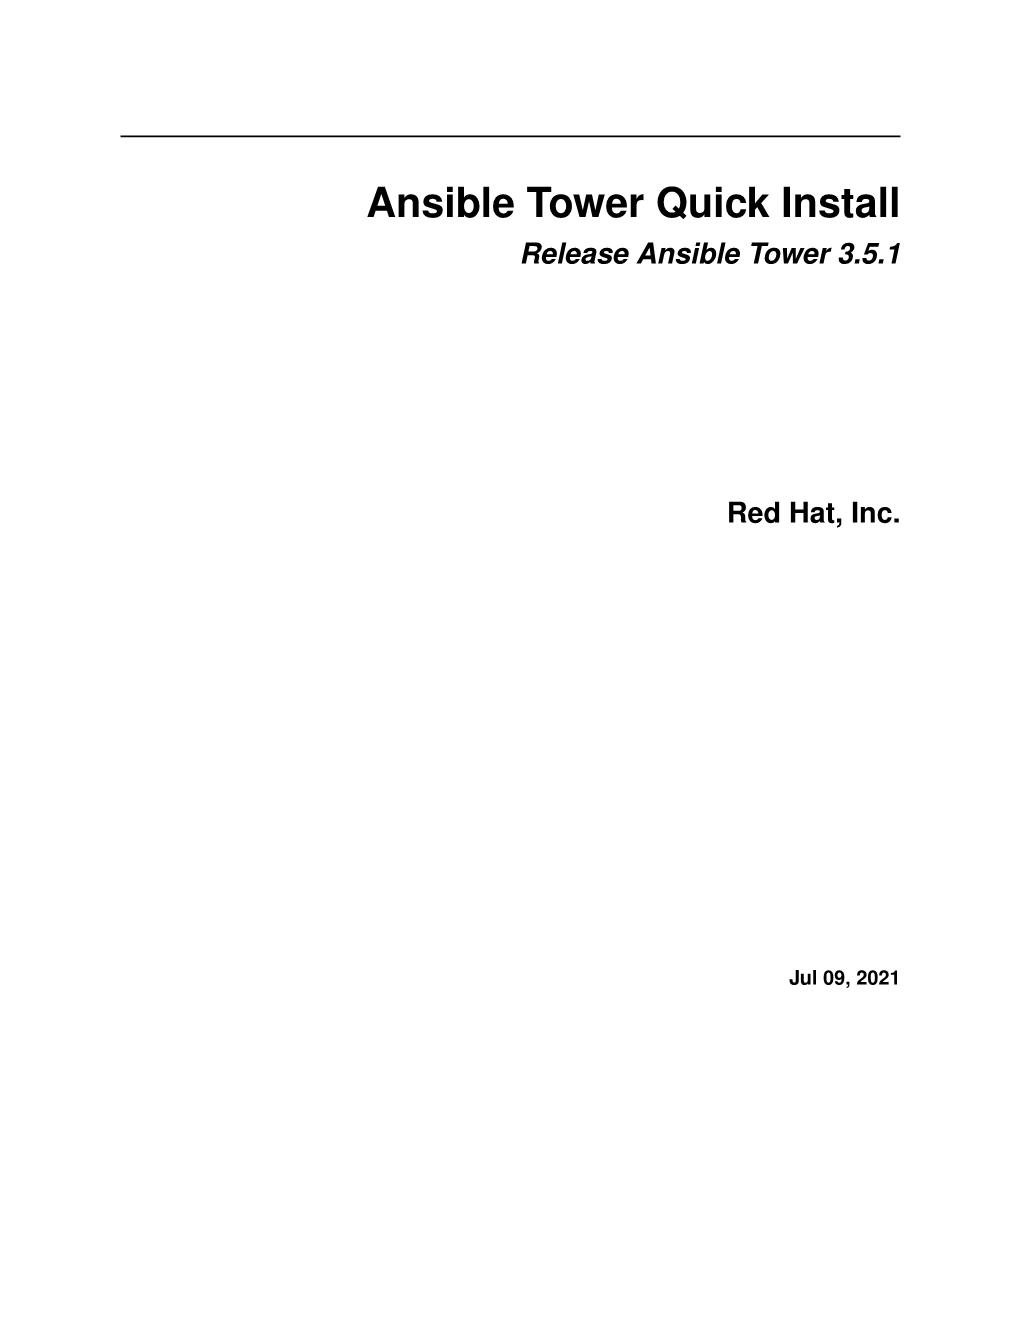 Ansible Tower Quick Install Release Ansible Tower 3.5.1